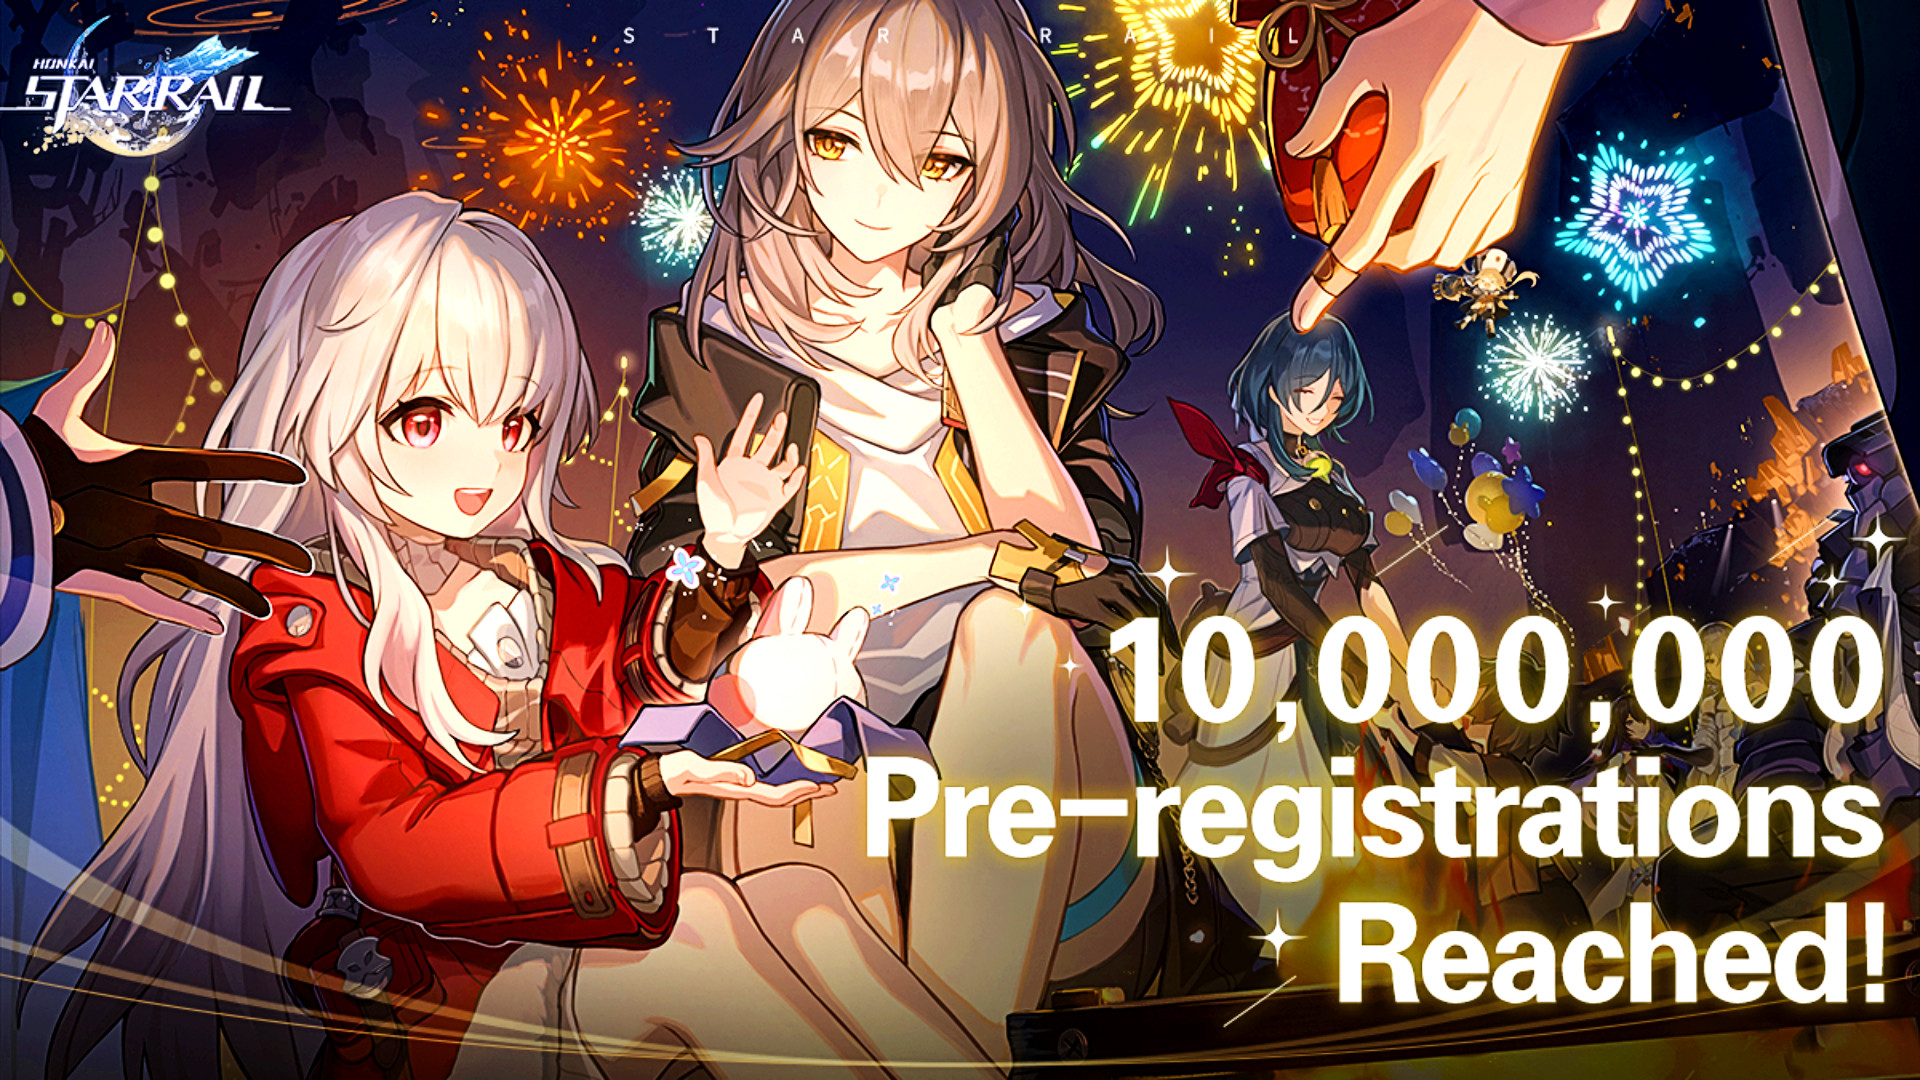 Honkai Star Rail official release date and countdown for all regions